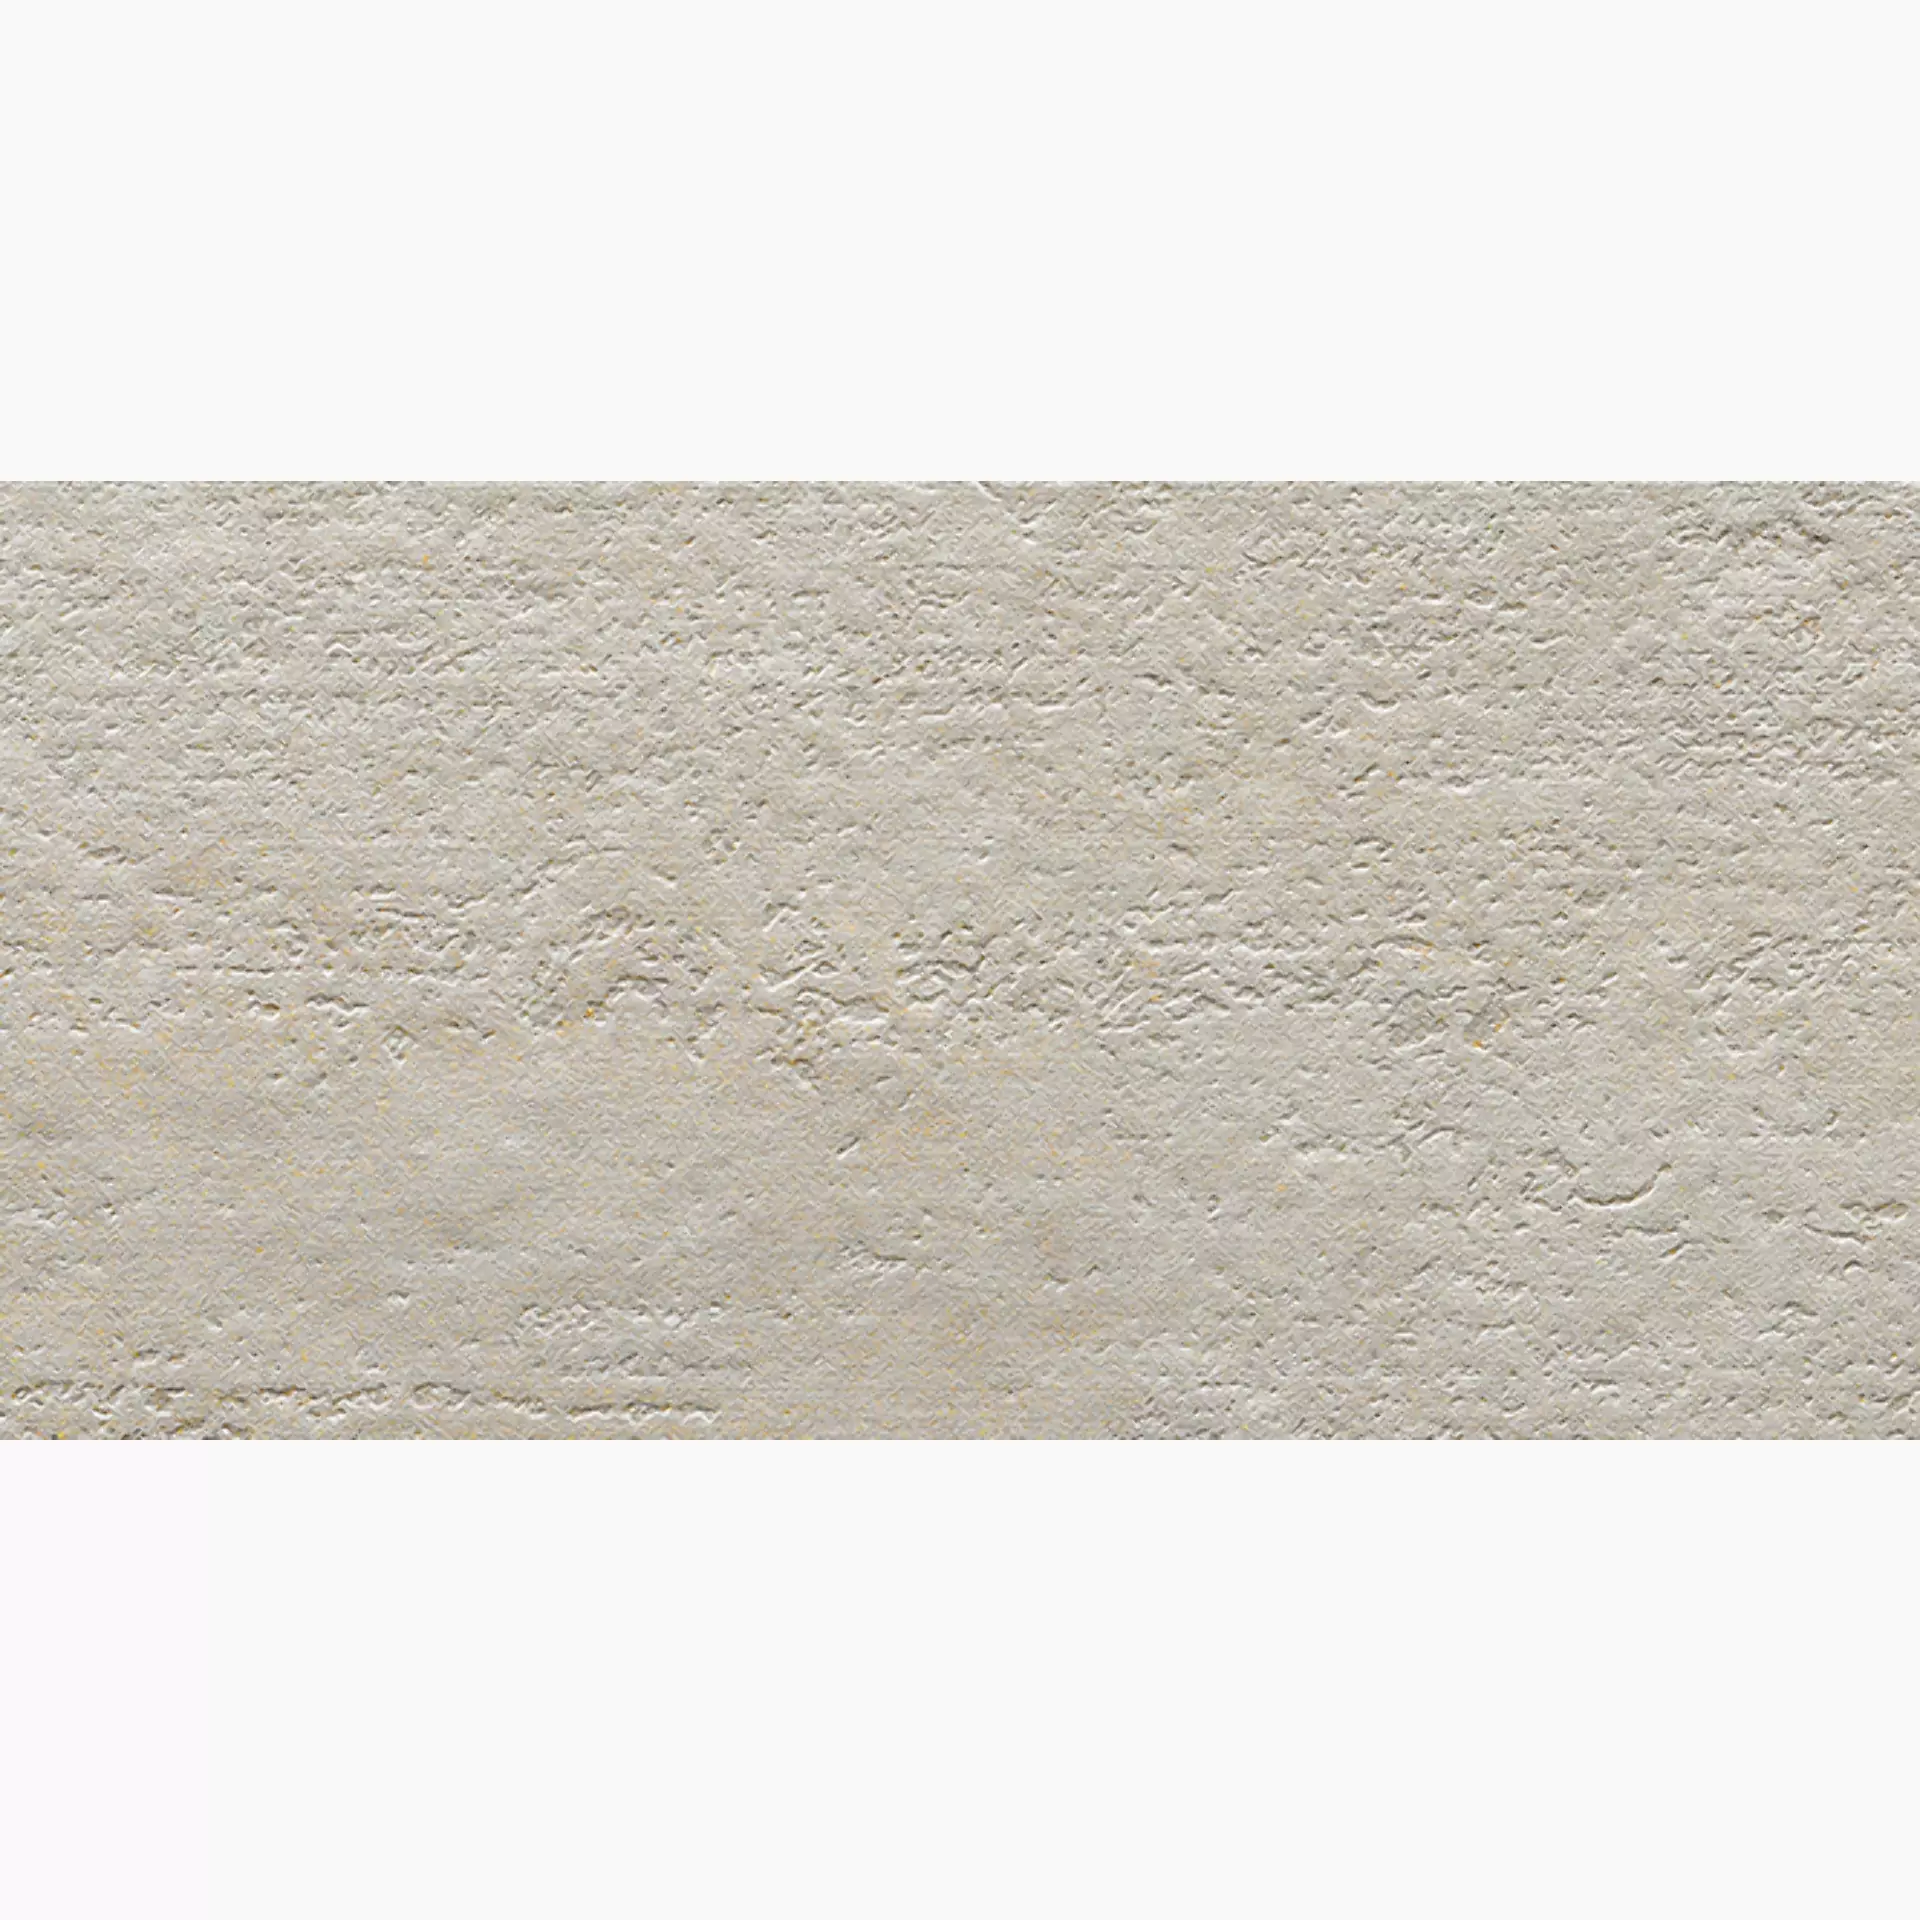 Del Conca Hse Stone Edition Dinamik Travertino Hse Naturale G8SE10R 30x60cm rectified 8,5mm